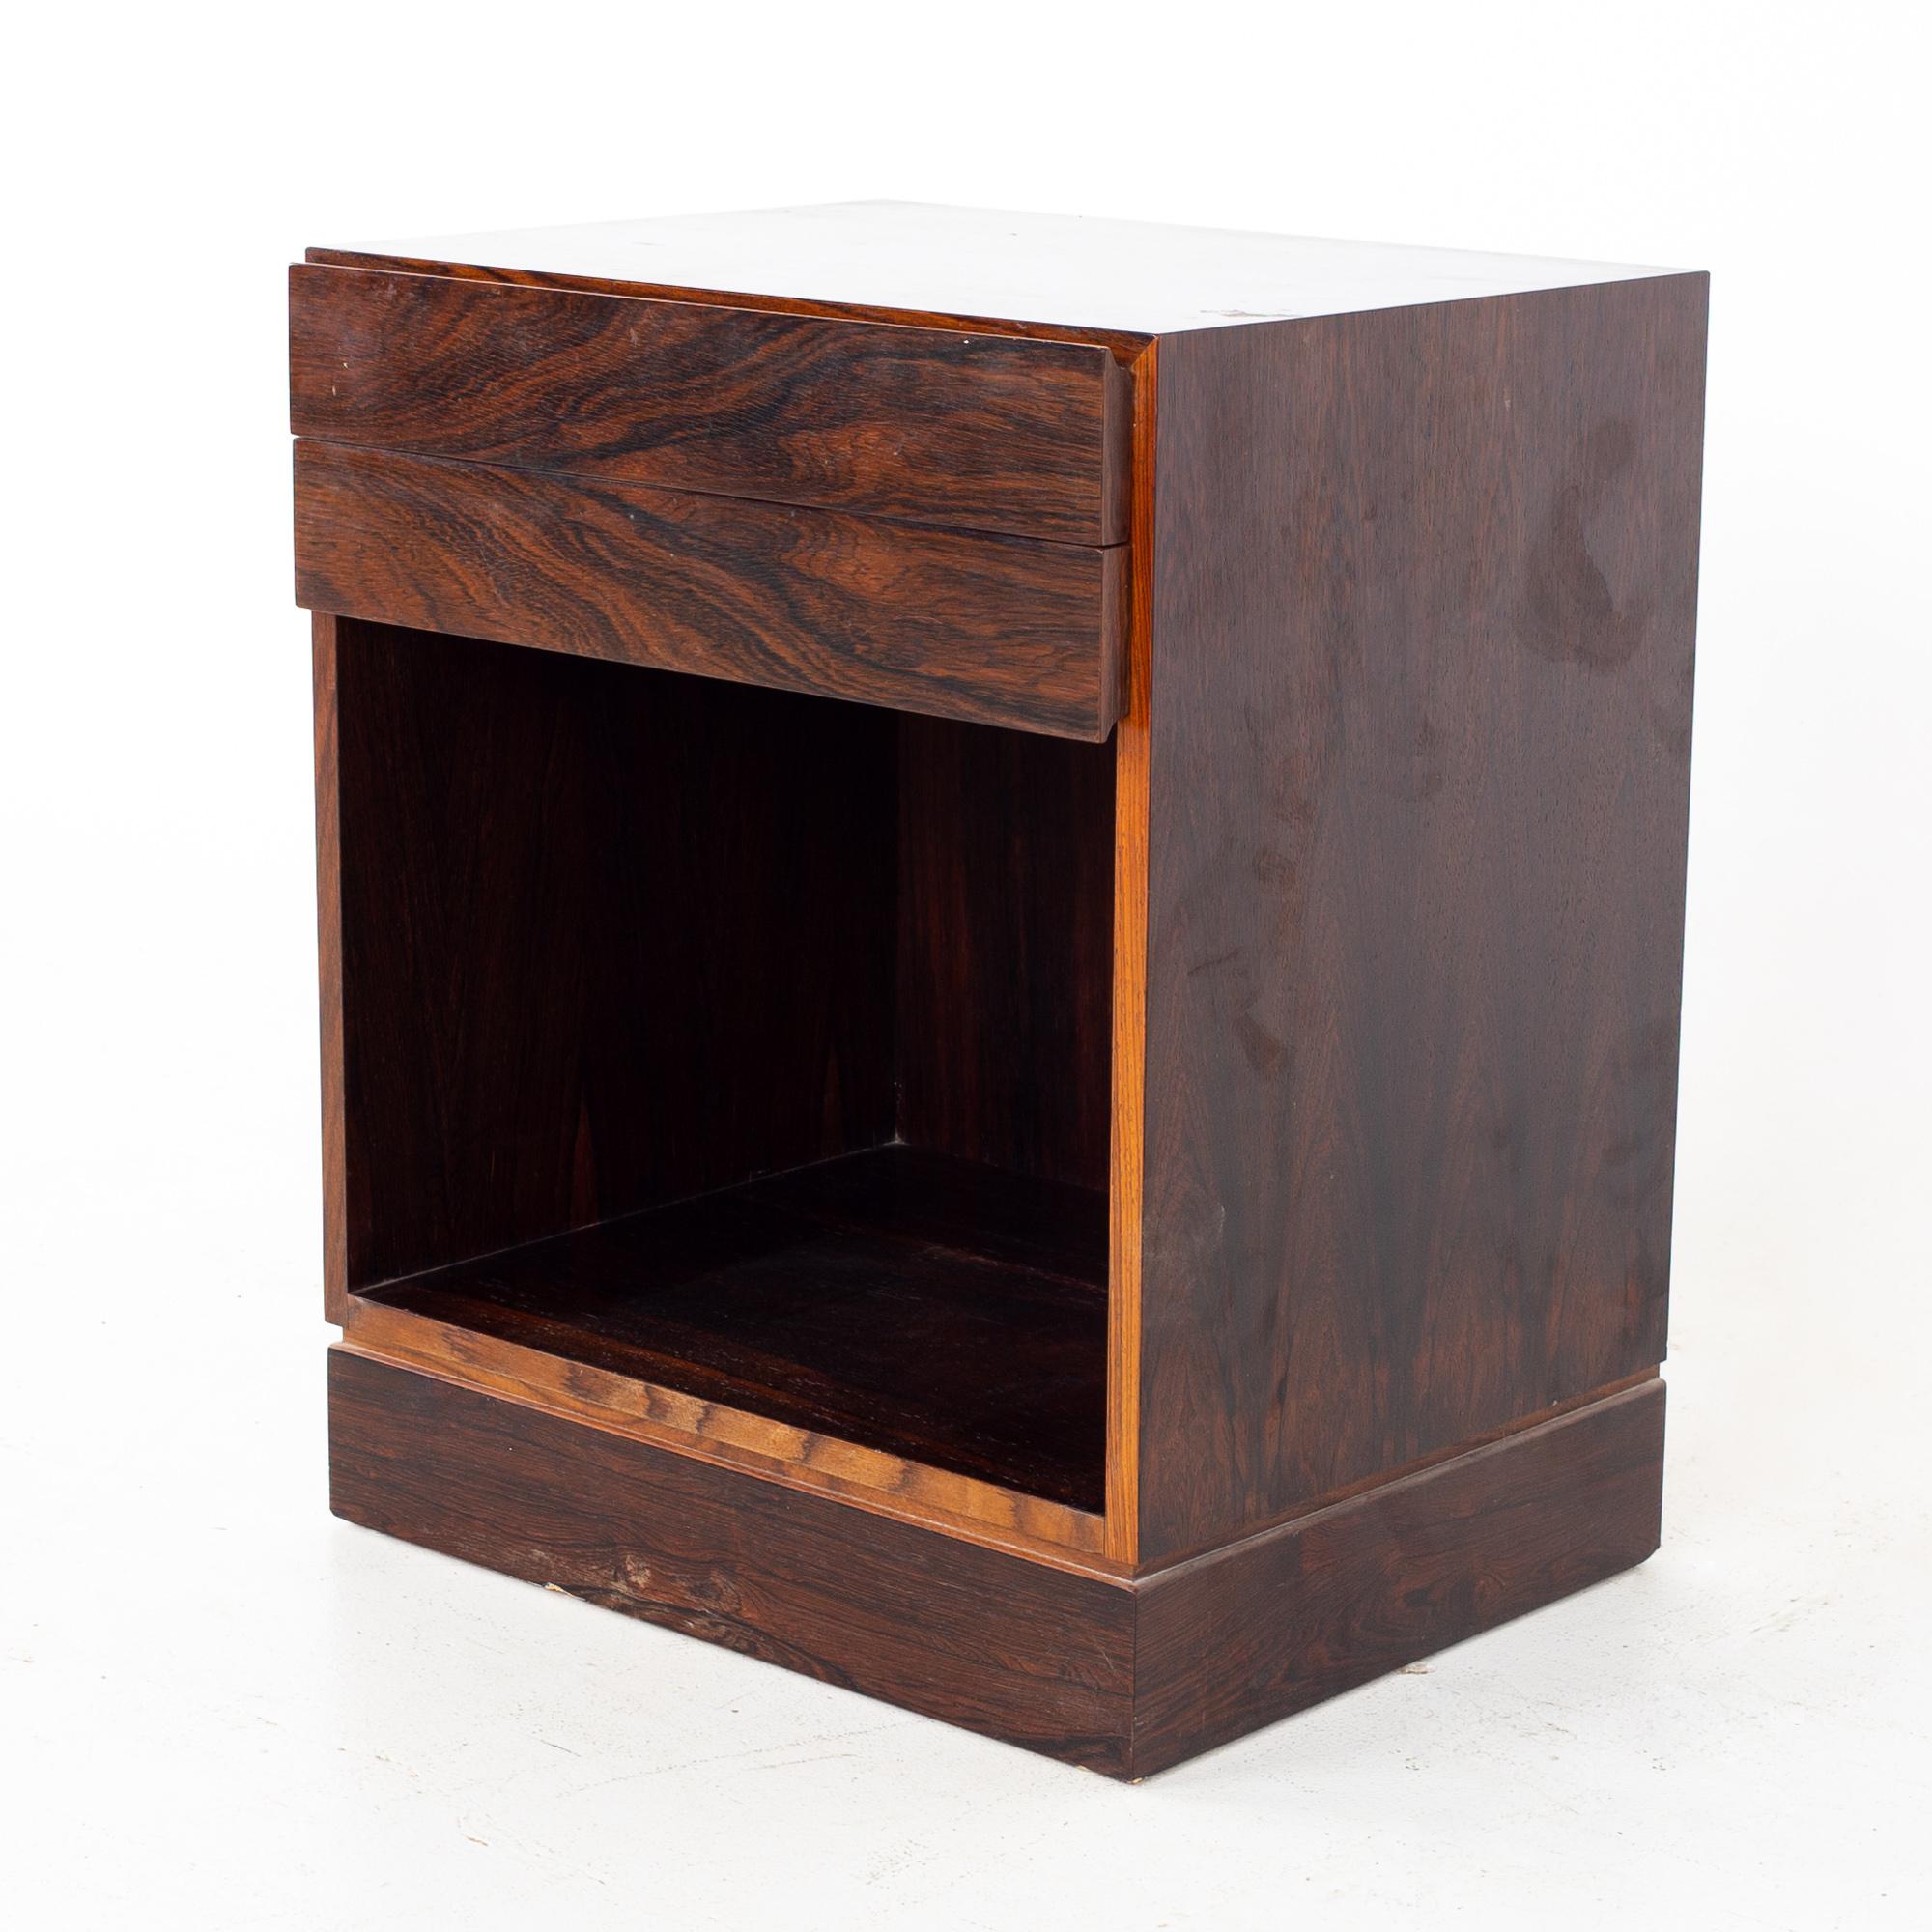 Mid Century Danish rosewood nightstand
Nightstand measures: 18.5 wide x 15 deep x 22.5 inches high

All pieces of furniture can be had in what we call restored vintage condition. That means the piece is restored upon purchase so it’s free of